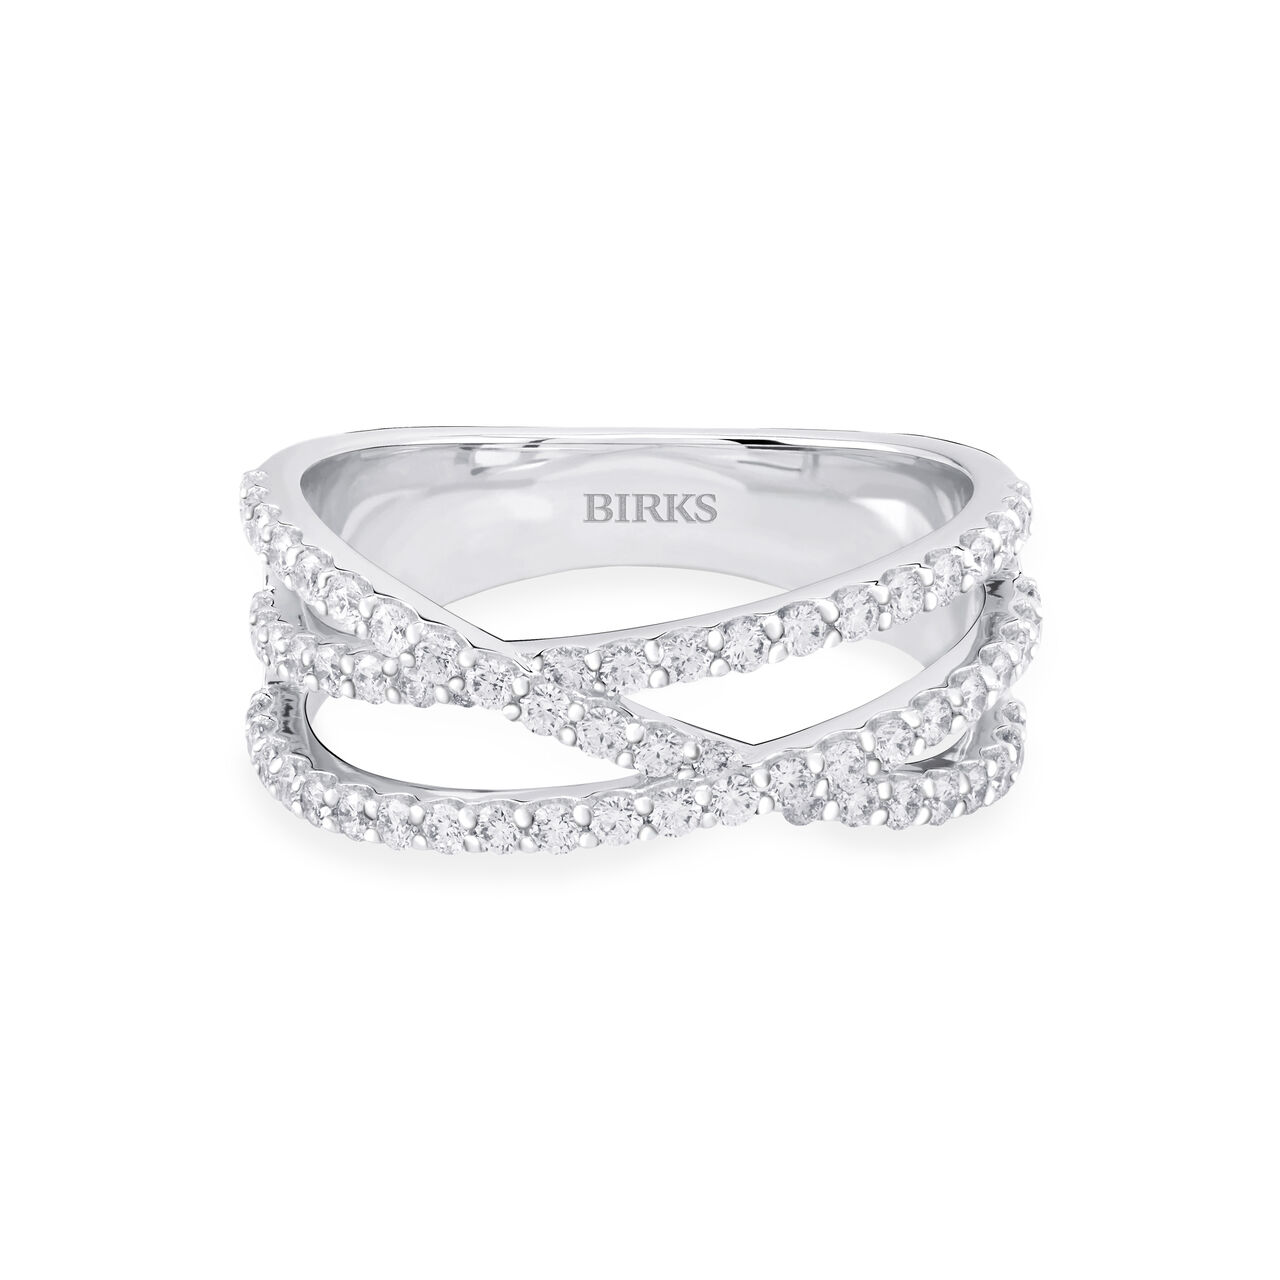 Birks Rosée du Matin  Diamond and White Gold Ring, Small 450016187187